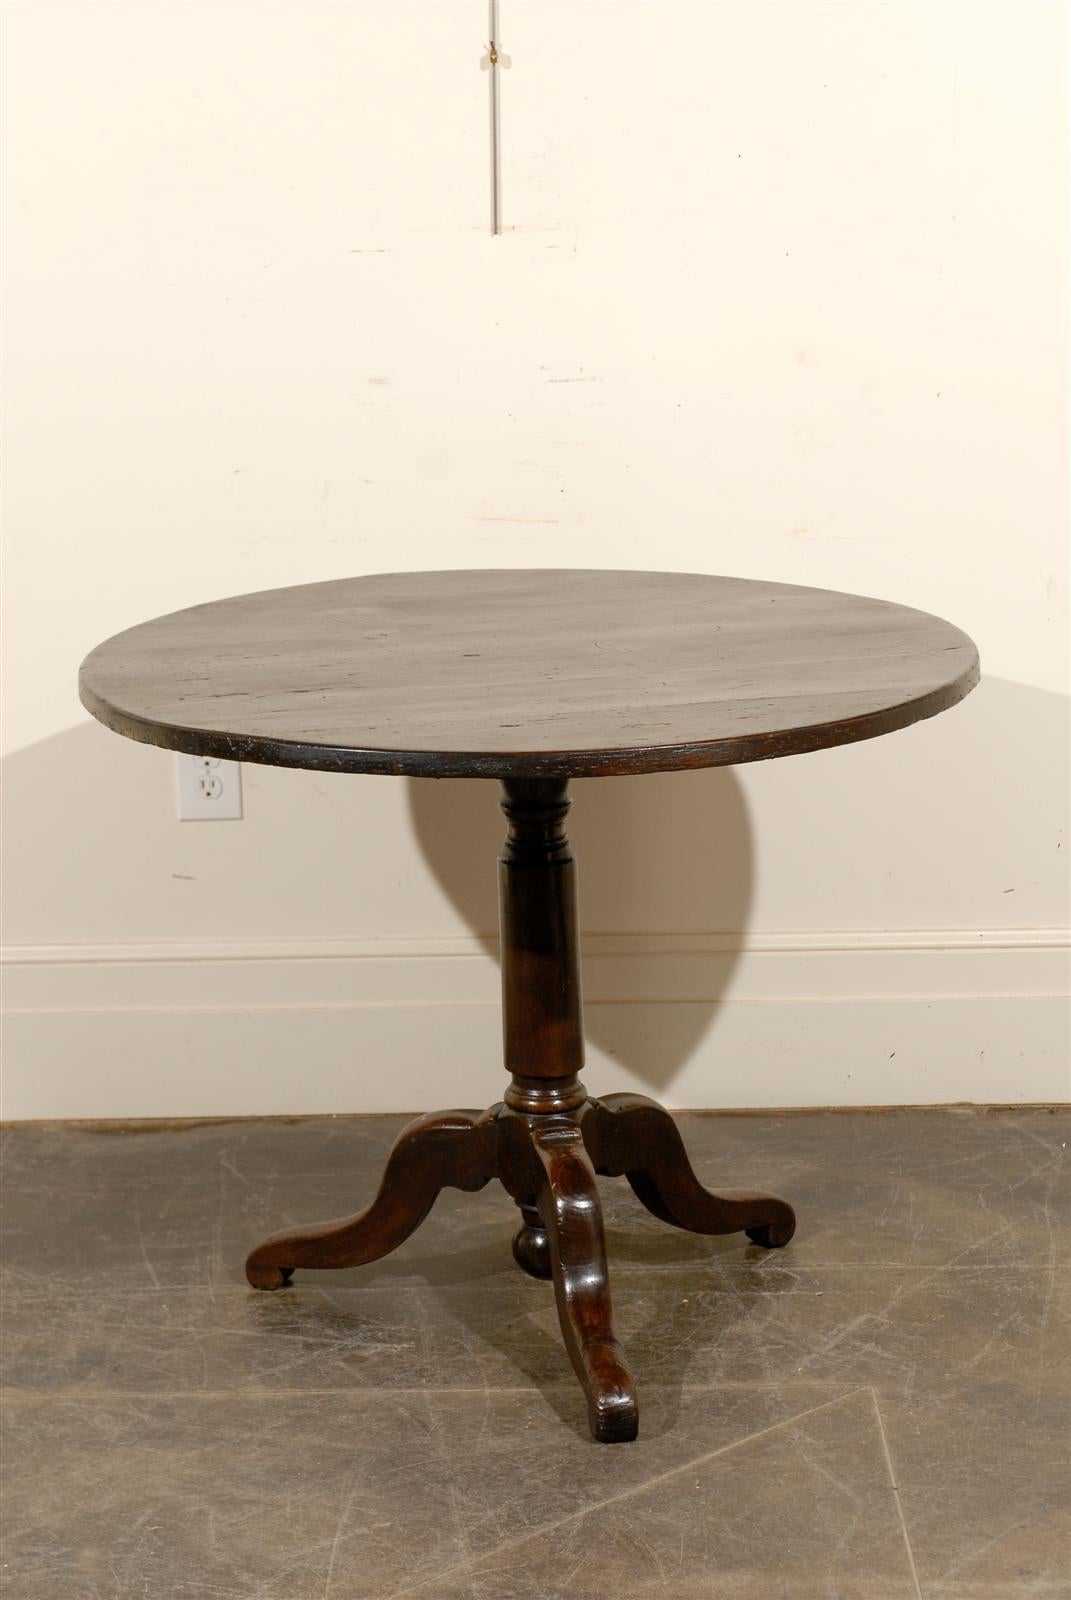 A wooden French round pedestal table from the turn of the century (19th to 20th). This side table features a simple round top supported by a pedestal base wit tripod scrolled feet. The lines on this French table circa 1890 - 1910 are simple yet